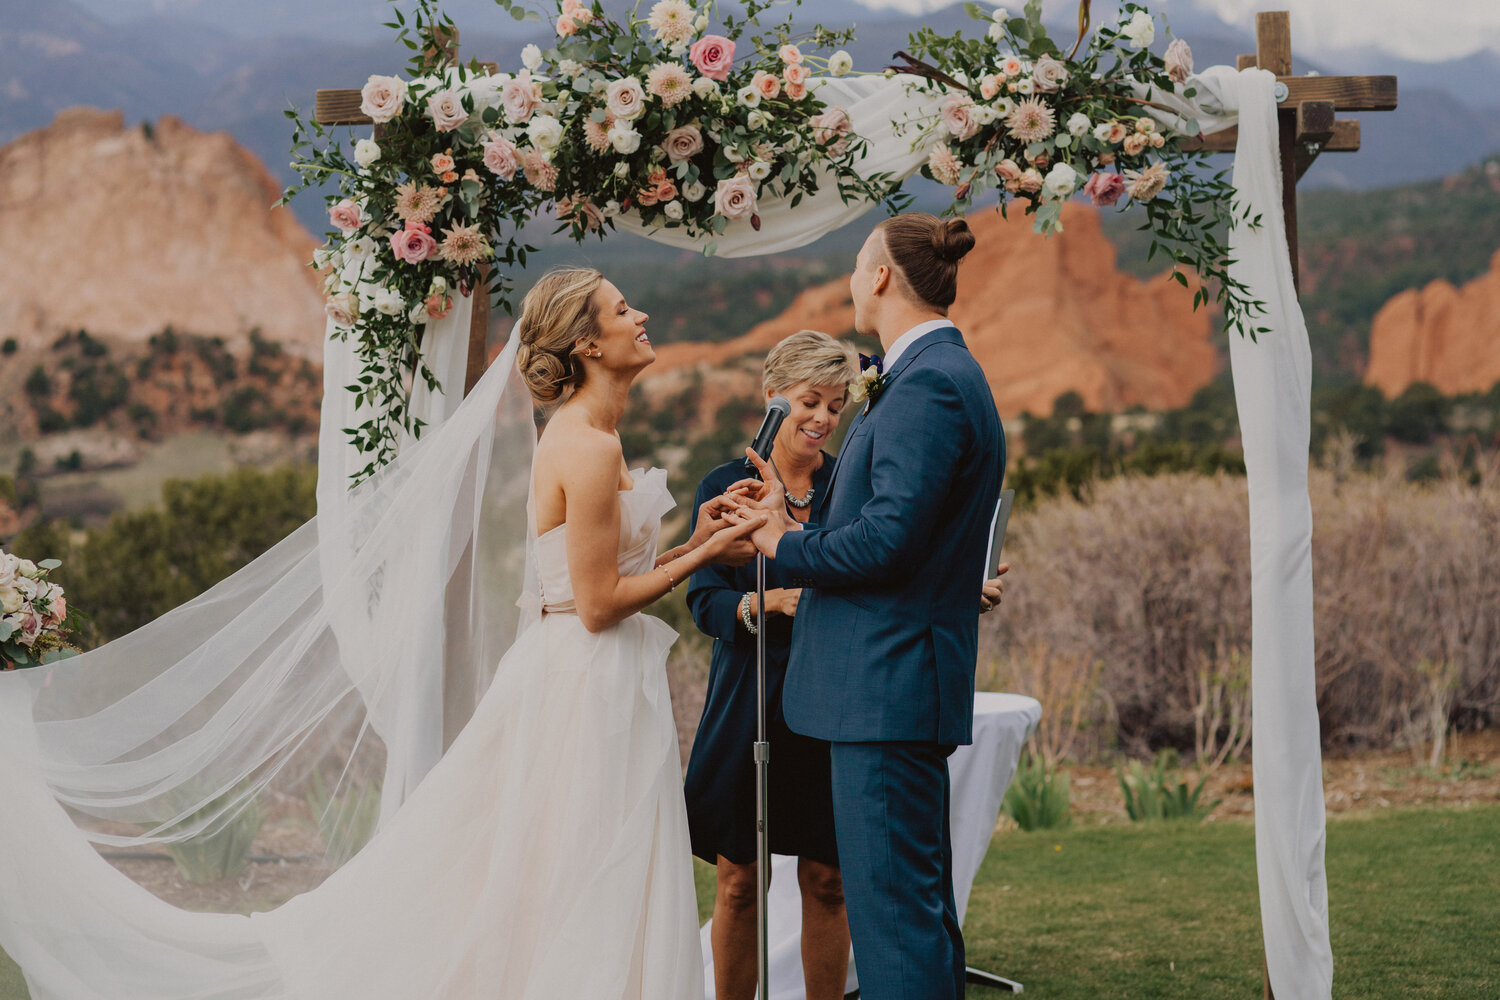 E &amp; D’s destination wedding captured by Kylie Morgan Photography at Garden of the Gods Resort.